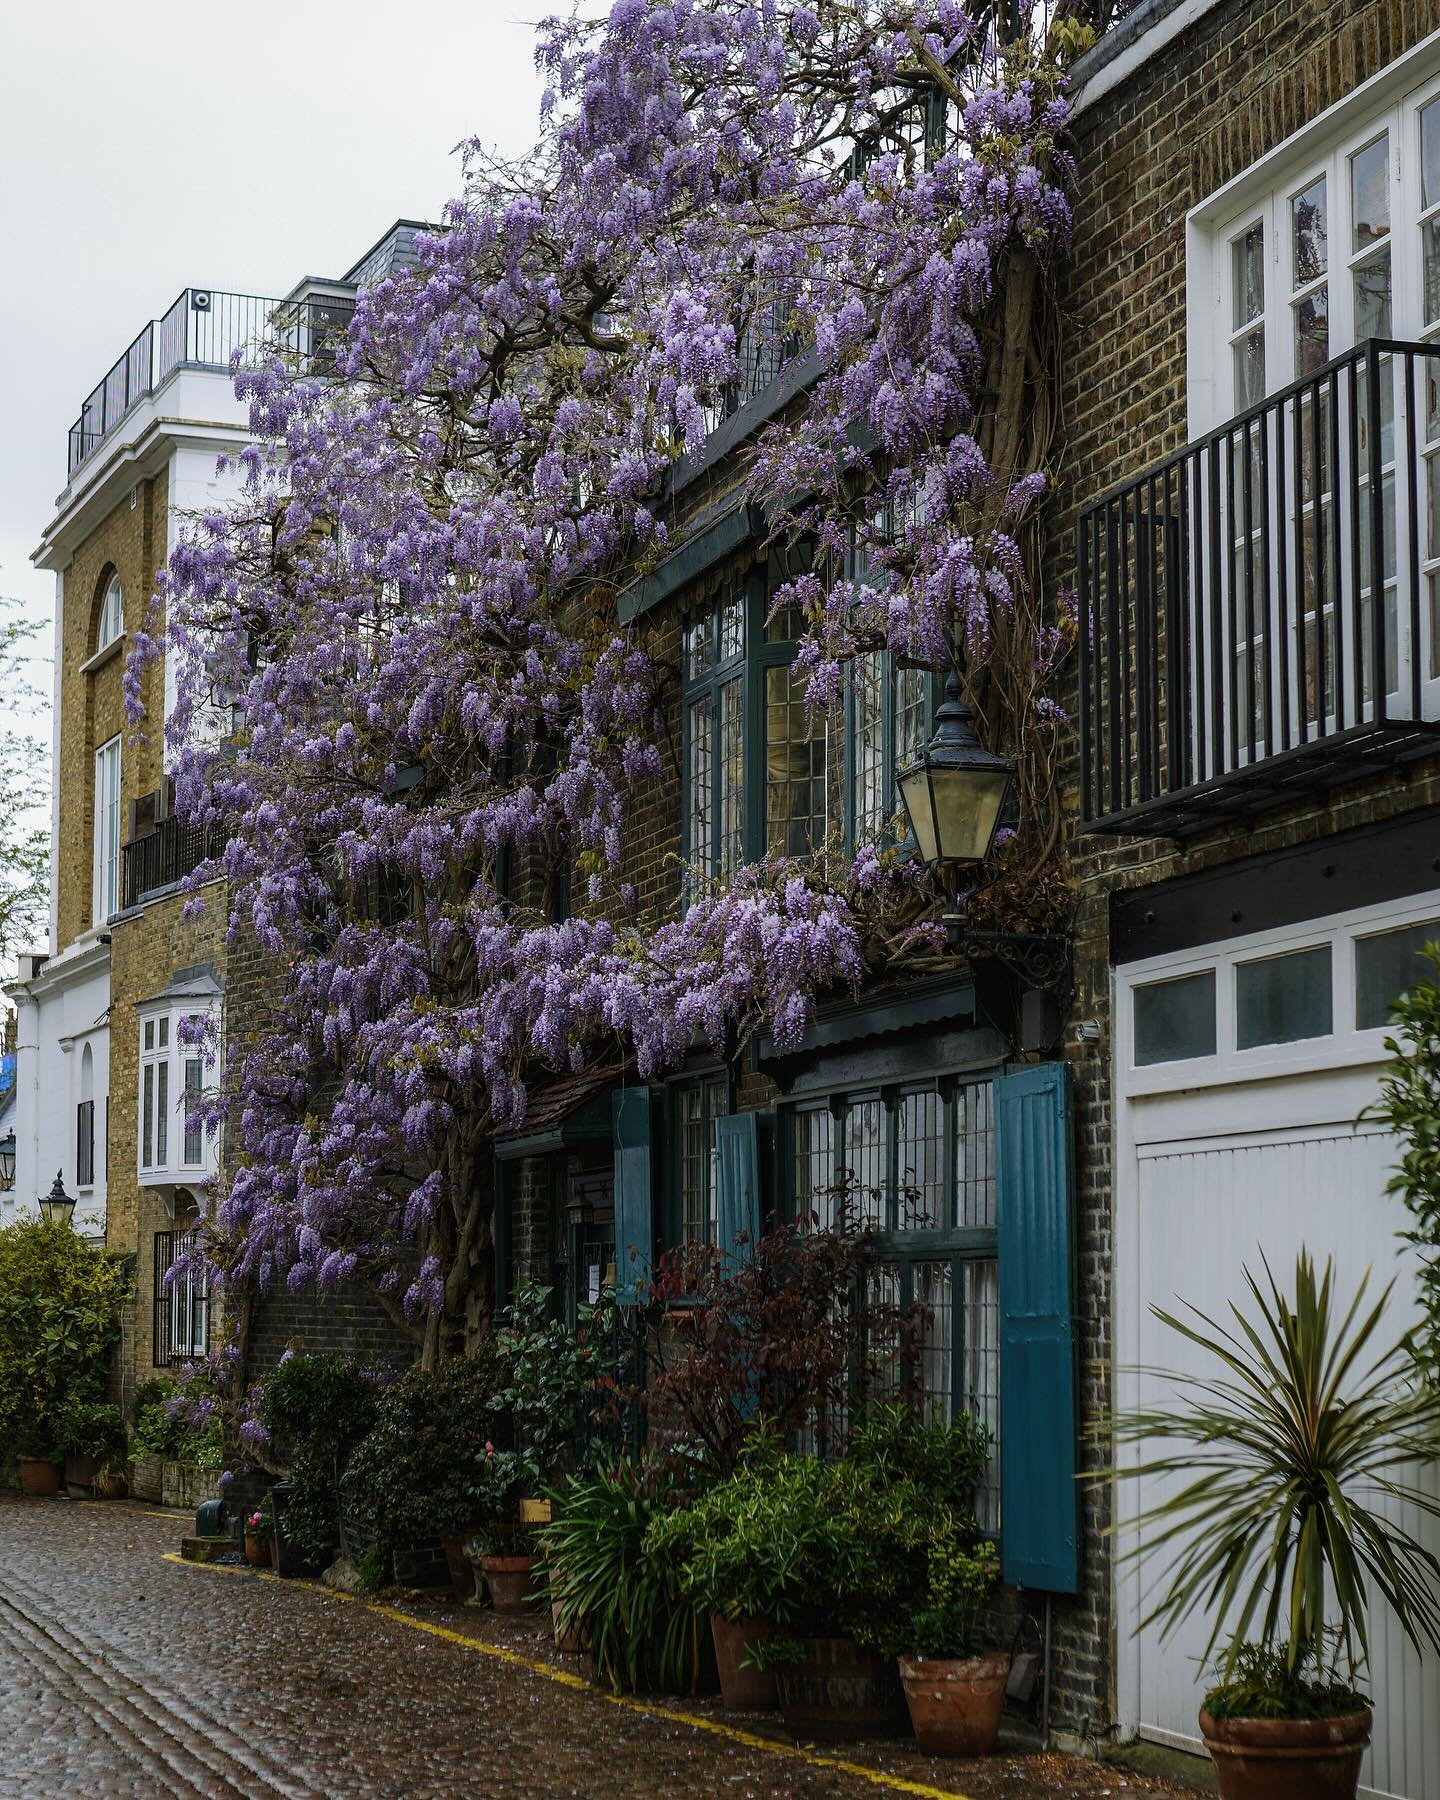 Always one of the best wisteria in London, in Kynance mews. 💜🤍💚
&bull;
&bull;
#wisteria #wisteriahysteria #wisteriaflowers #flowers #springflowers #springtime #springinlondon #london #londonphotography #londonphoto #londontravel #visitlondon #lond